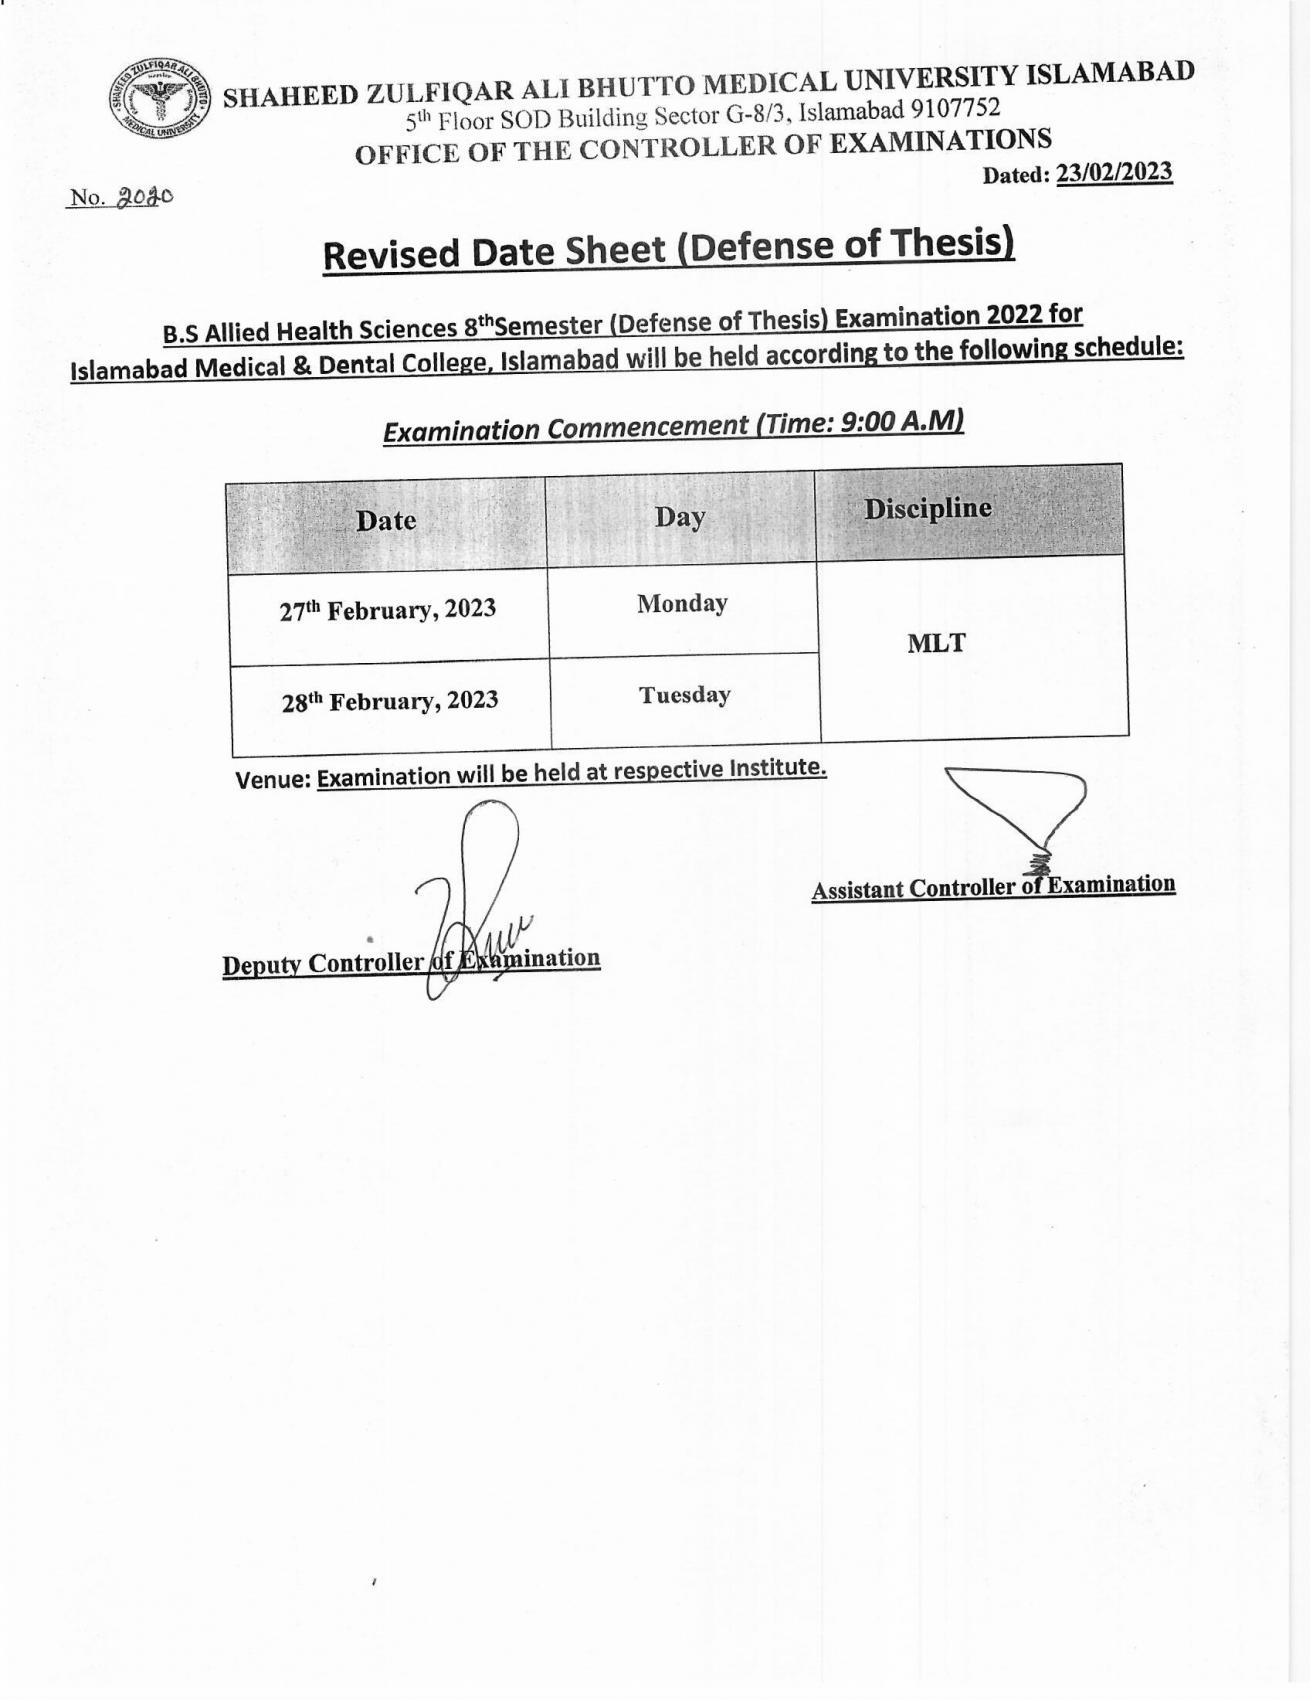 Revised Date Sheet - BS AHS 8th Semester Defense of Thesis Examination 2022